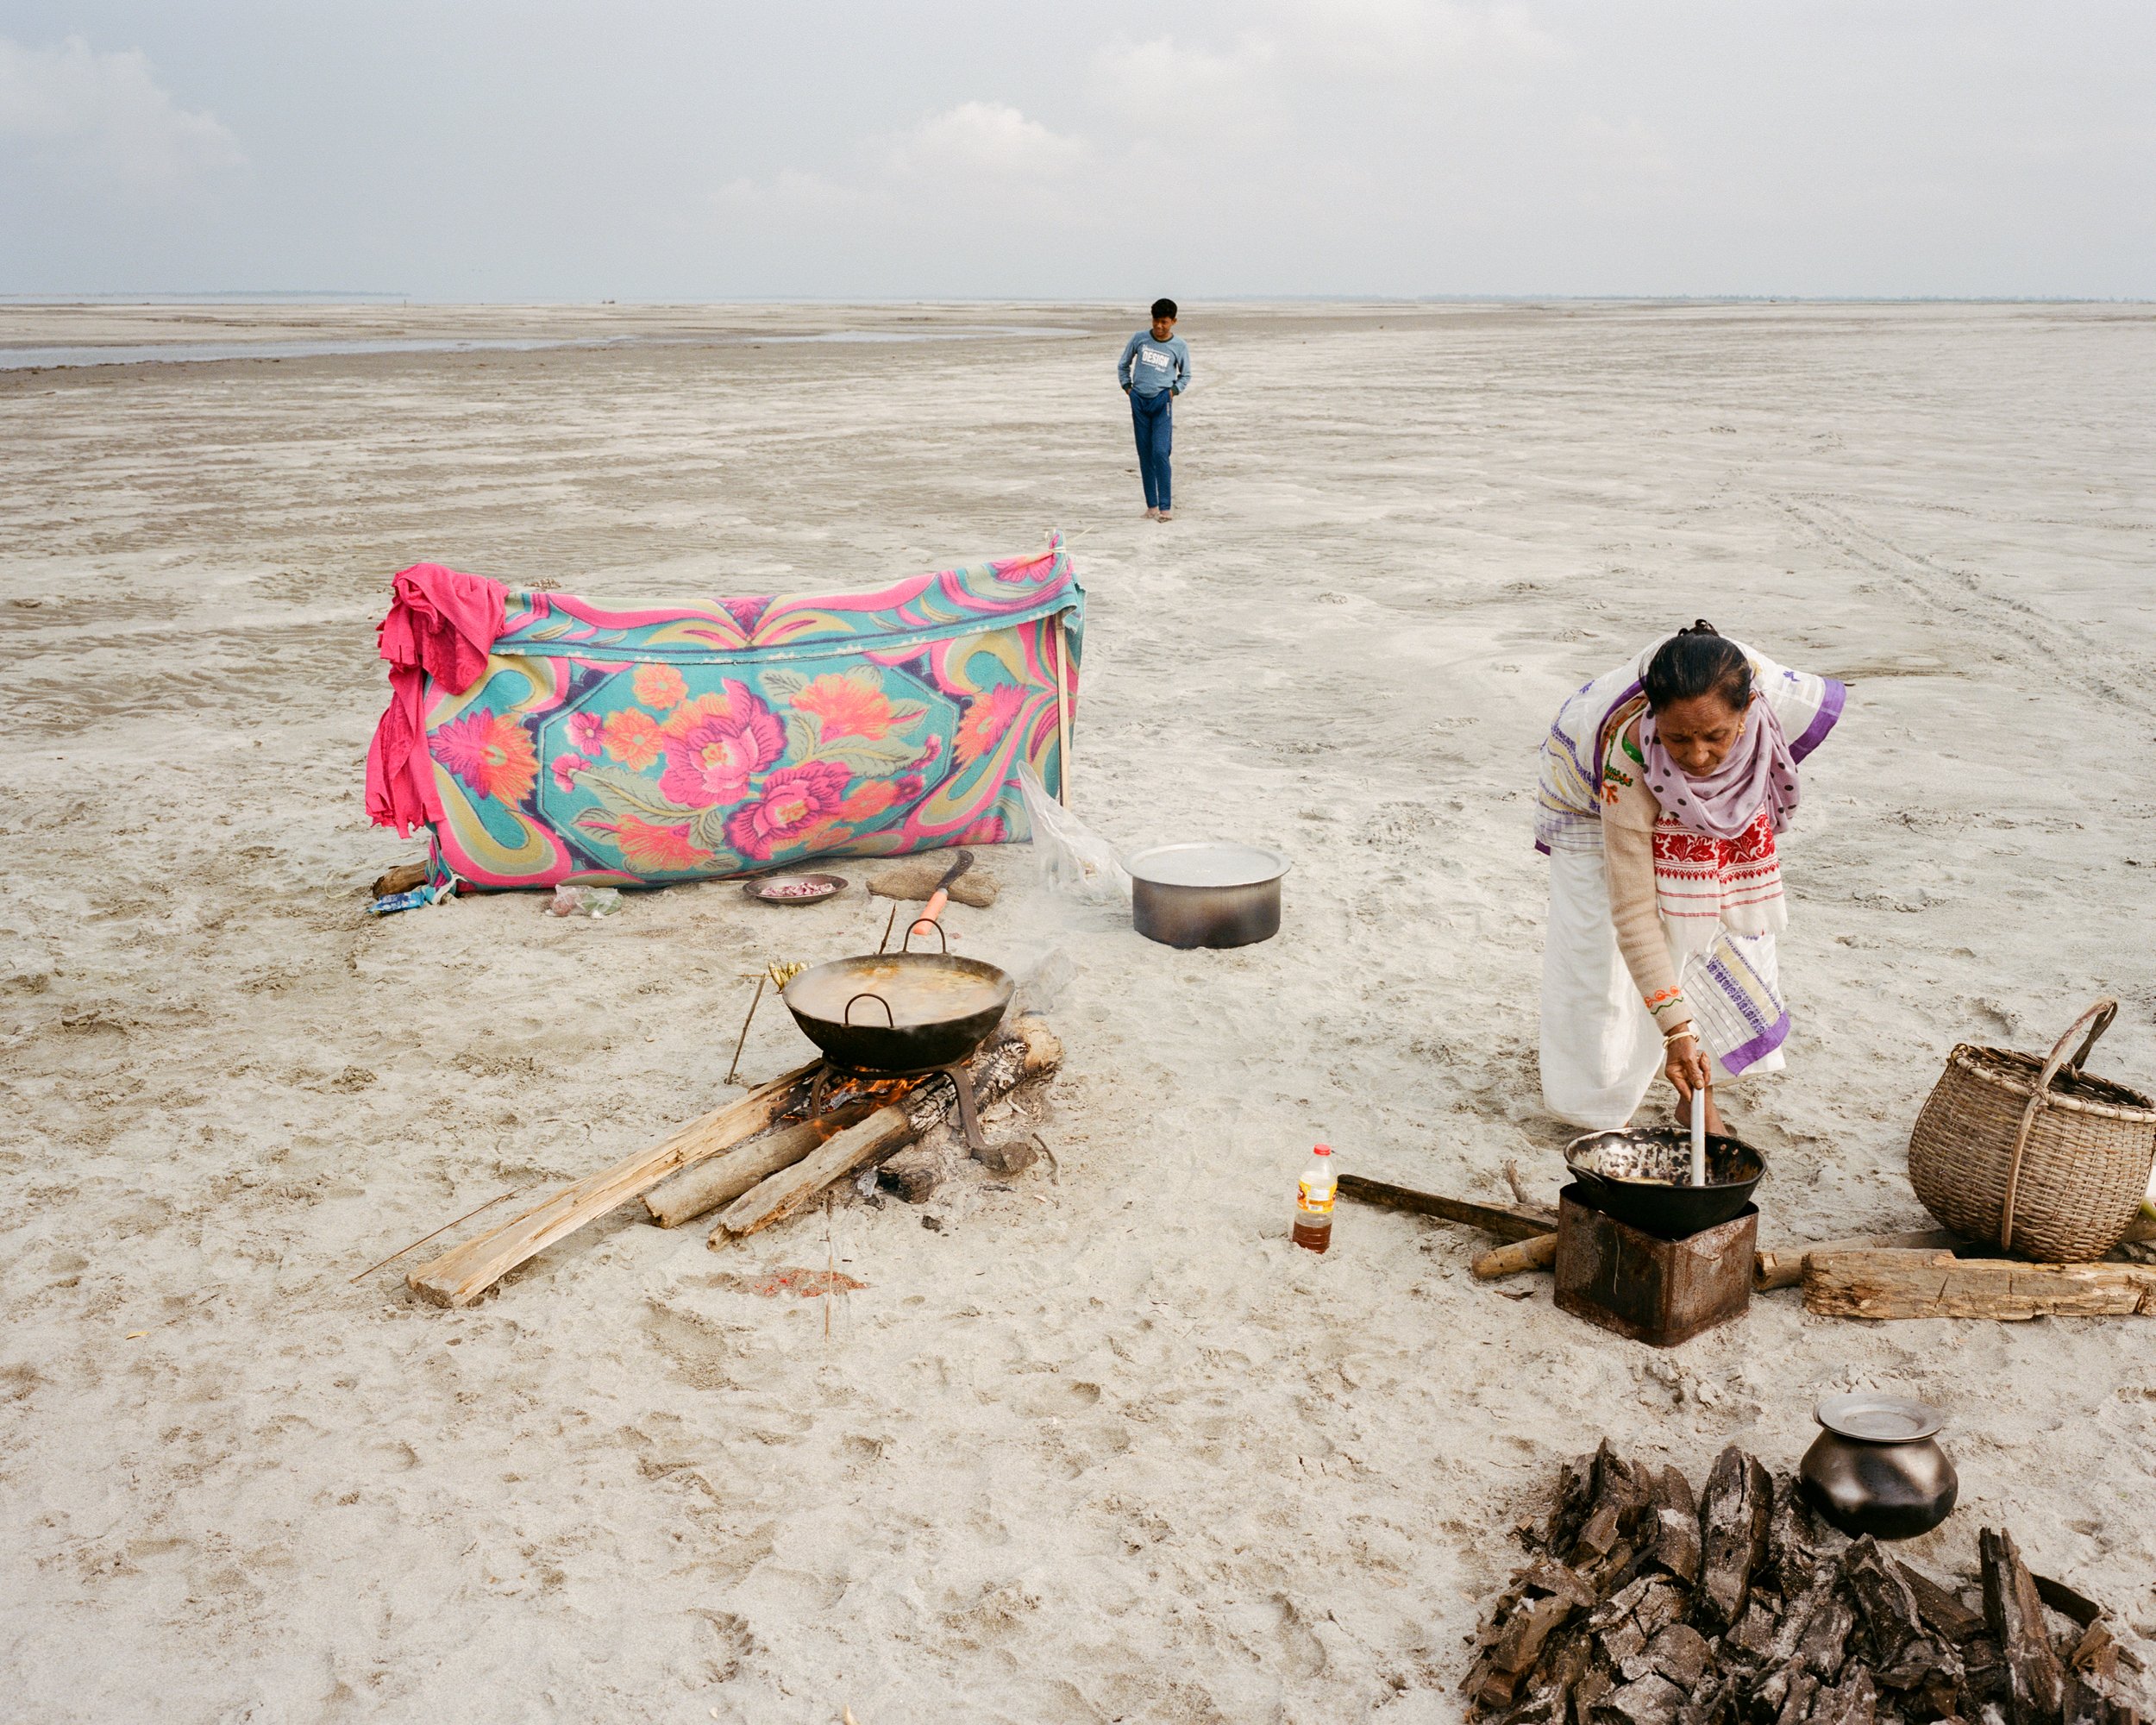  Arima Das is cooking a festive lunch on a newly built sand island for his family and friends. After the morning fishing, they spend a full day together: praying for the abundance of fish to the gods of the river, eating rice, drinking tea and buffal